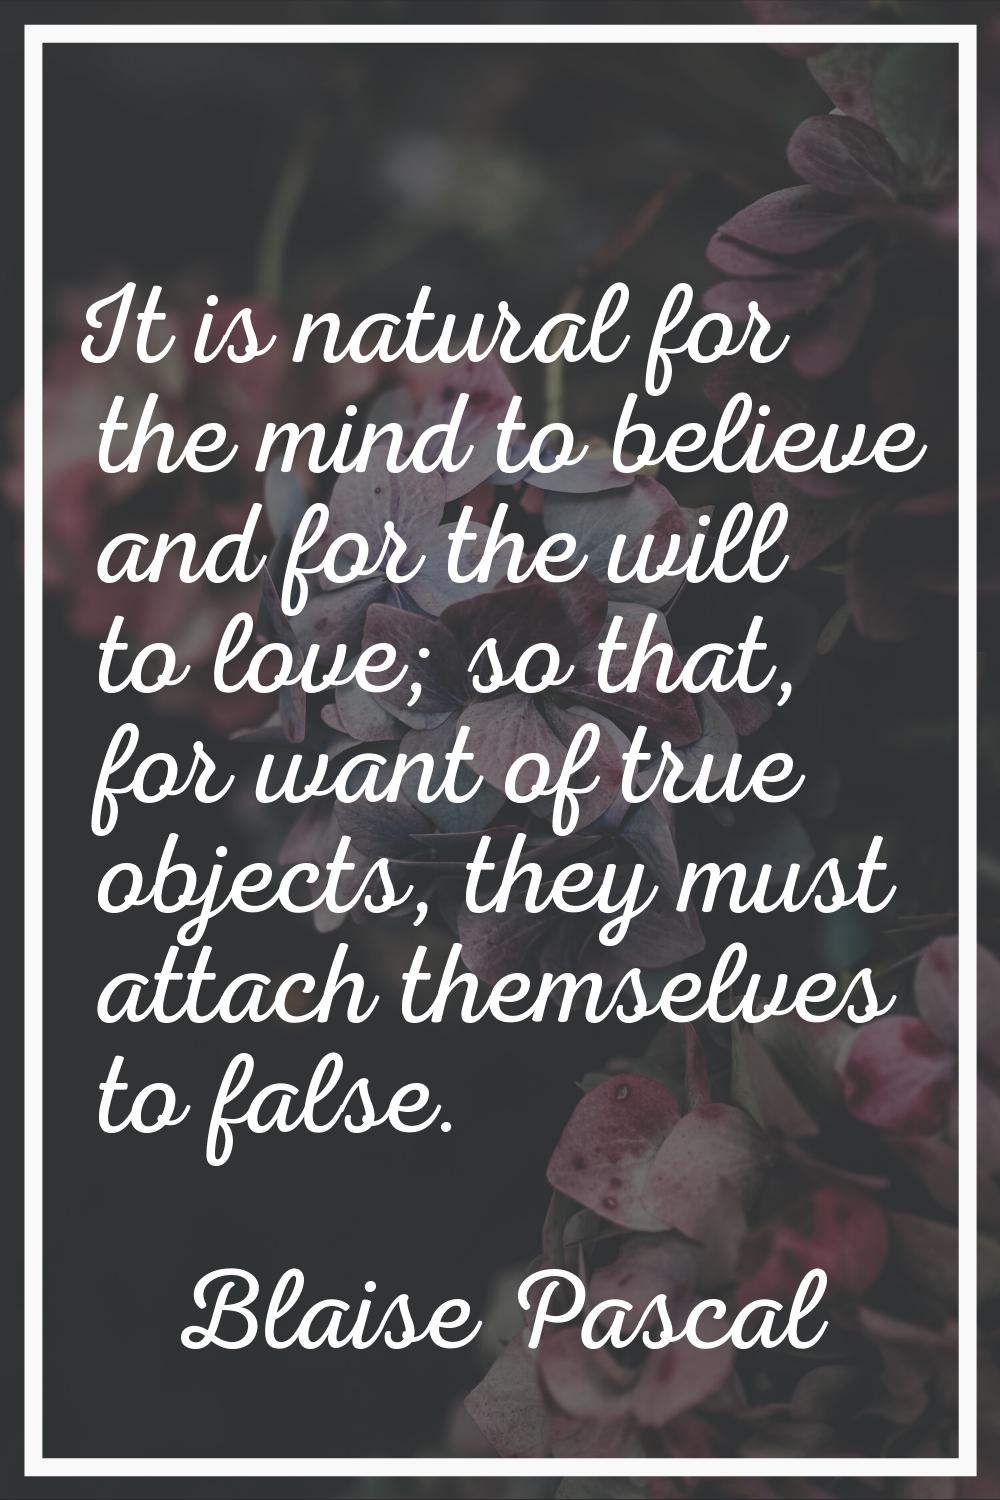 It is natural for the mind to believe and for the will to love; so that, for want of true objects, 